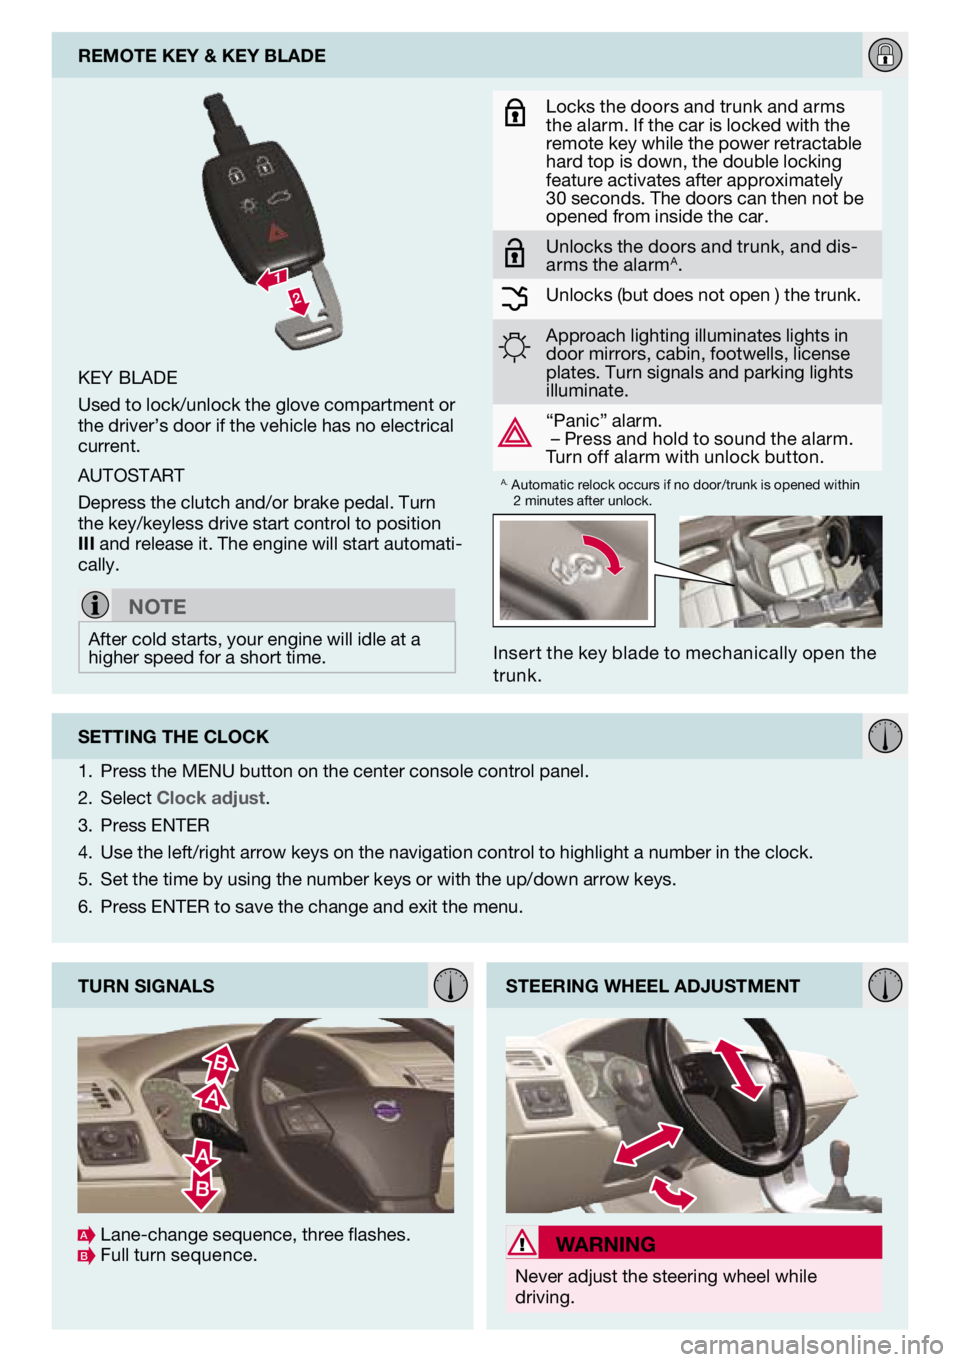 VOLVO C70 2012  Quick Guide 
Inser t the key blade to mechanically open the trunk.
key blade
Used to lock/unlock the glove compartment or the driver’s door if the vehicle has no electrical current.
aUtostart
depress the clutch